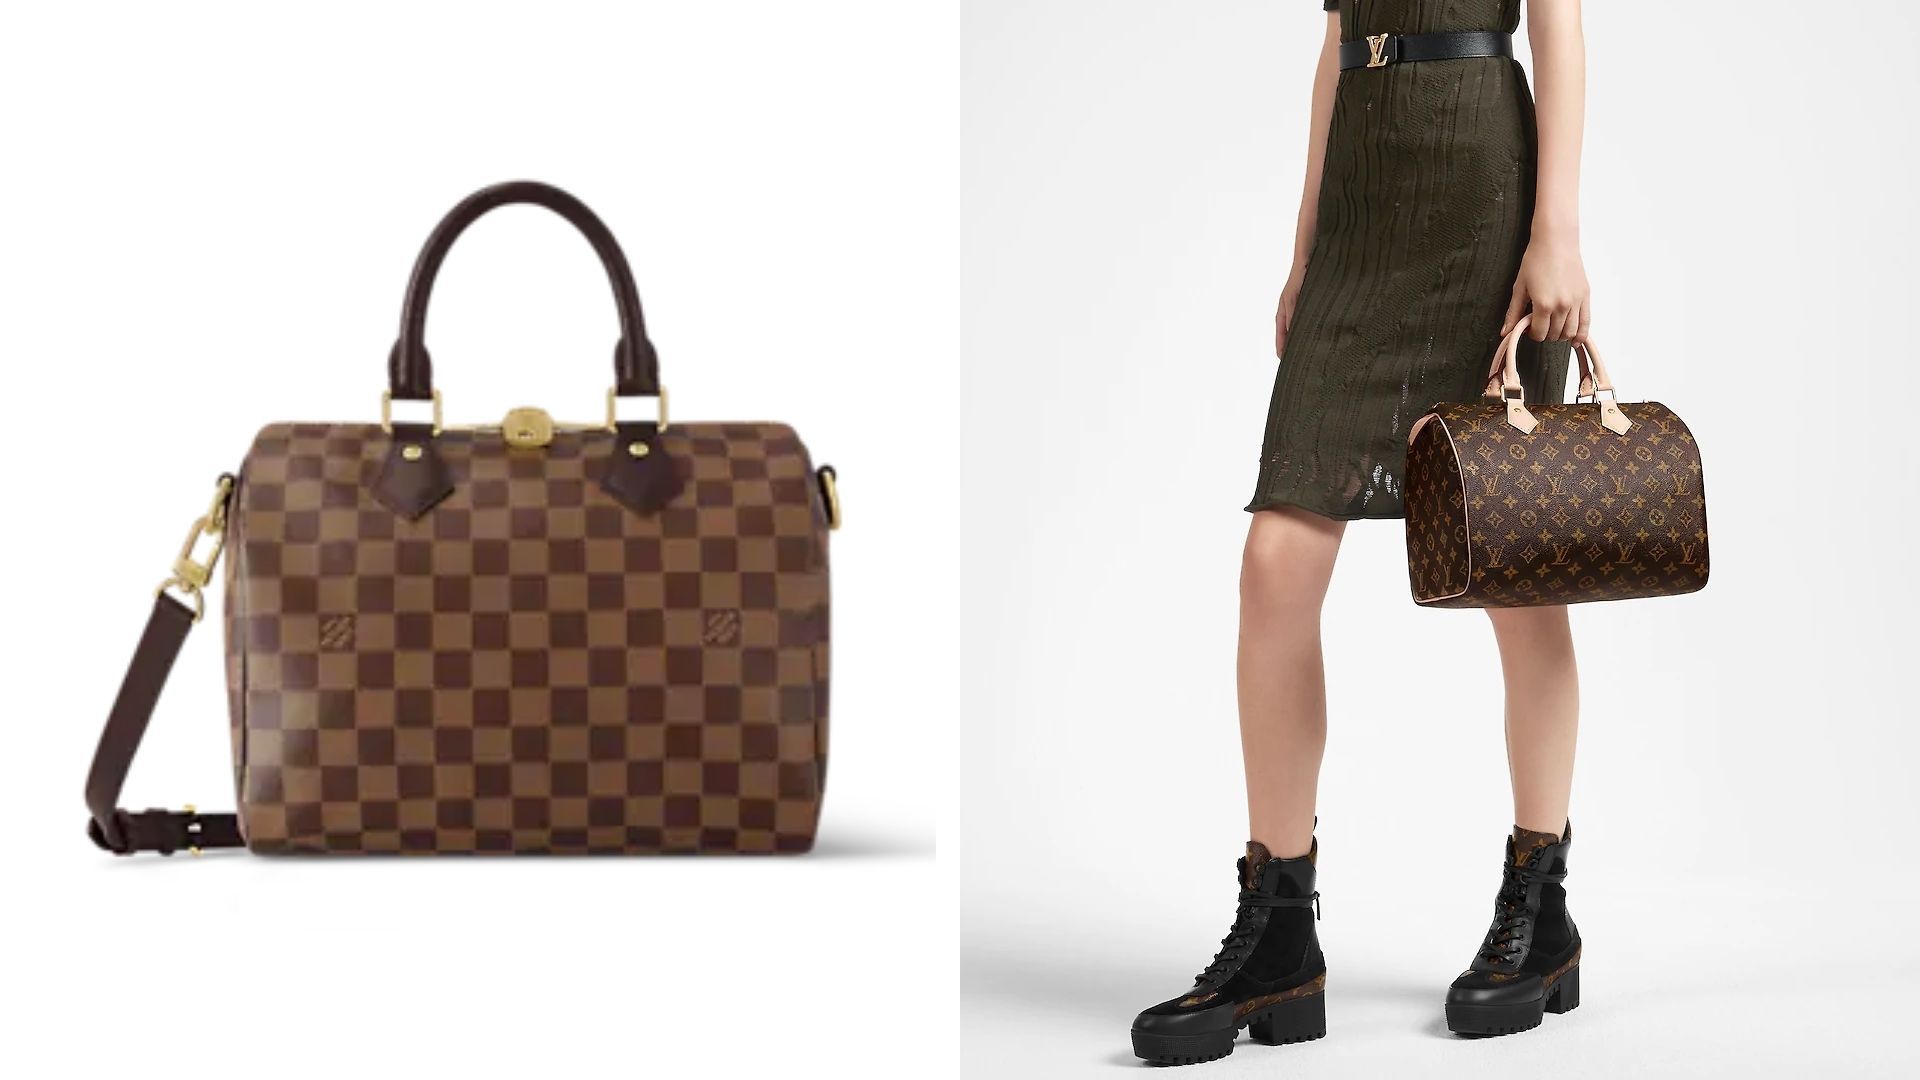 Most iconic bags- Louis Vuitton Speedy